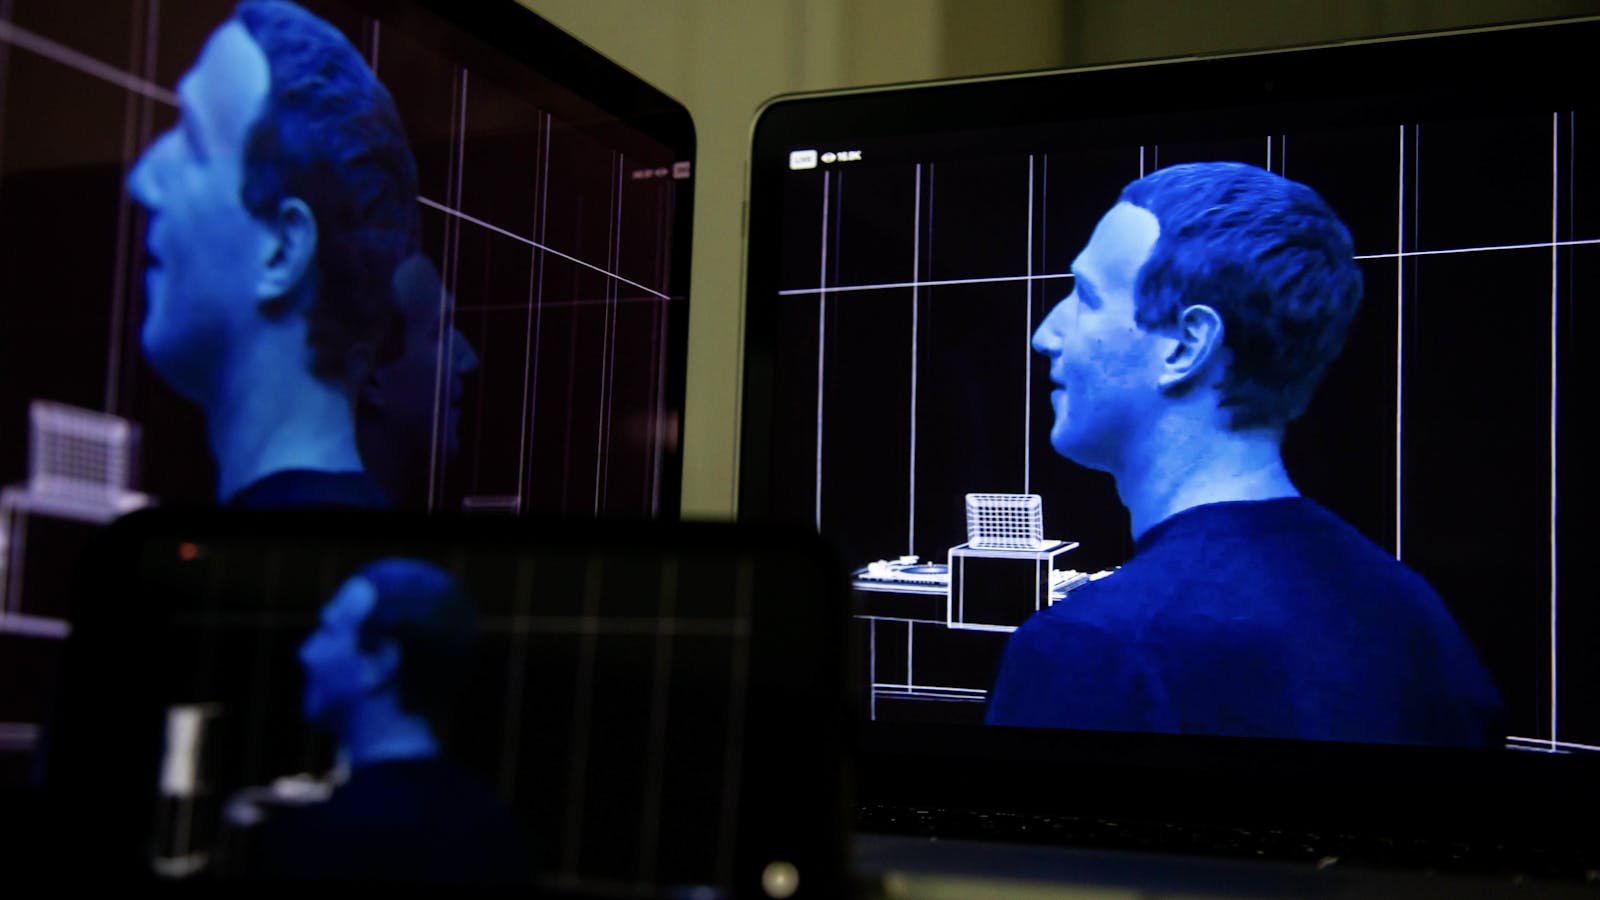 Meta CEO Mark Zuckerberg during an event last year. Photo by Bloomberg.